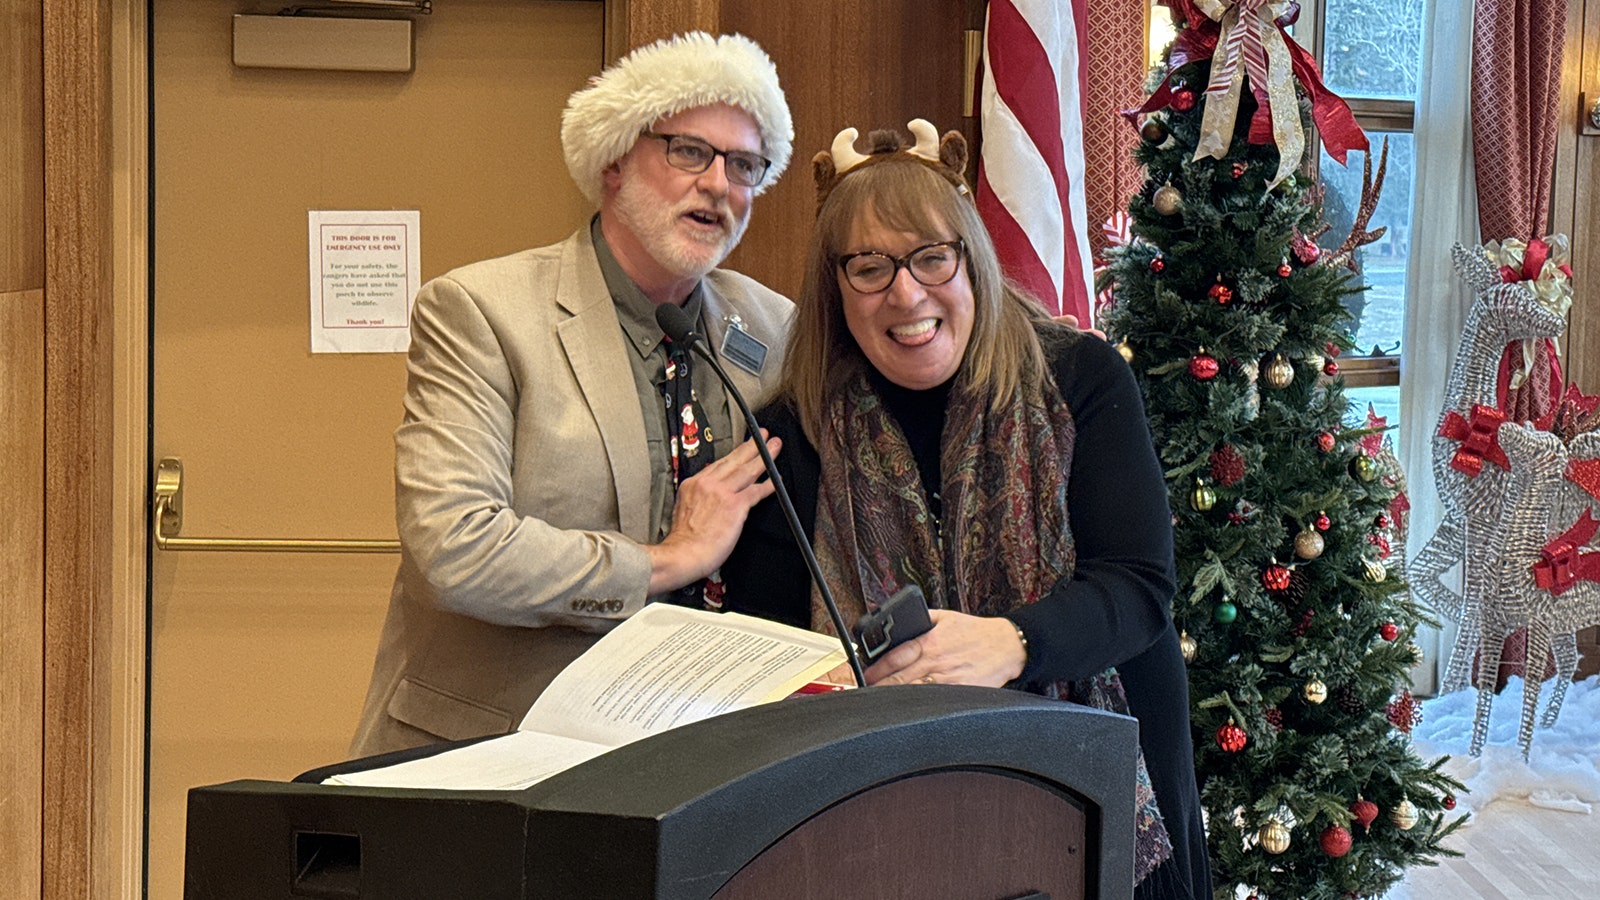 Xanterra's Rick Hoeninghausen and Karen Tryman welcome guests and locals to the annual Christmas tree lighting in the Map Room of Mammoth Hot Springs Hotel.